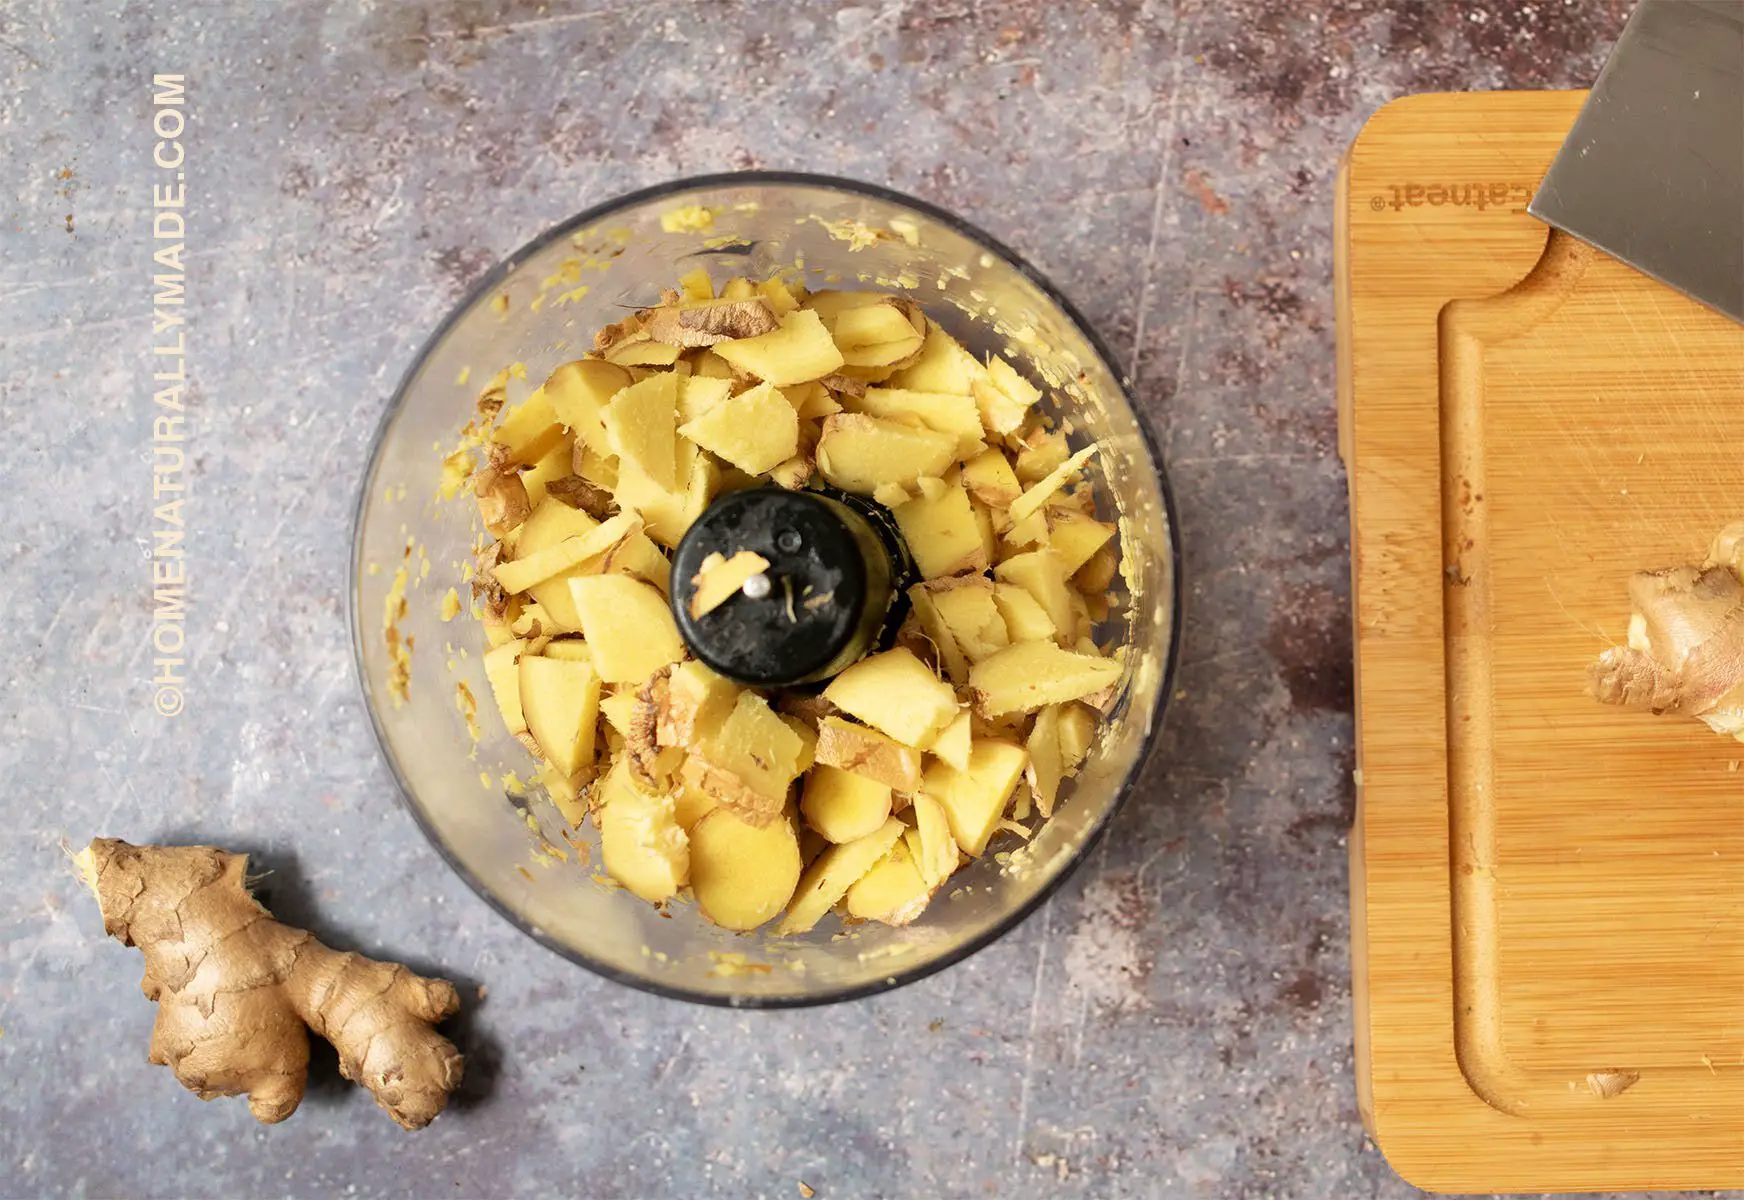 how to preserve fresh ginger?